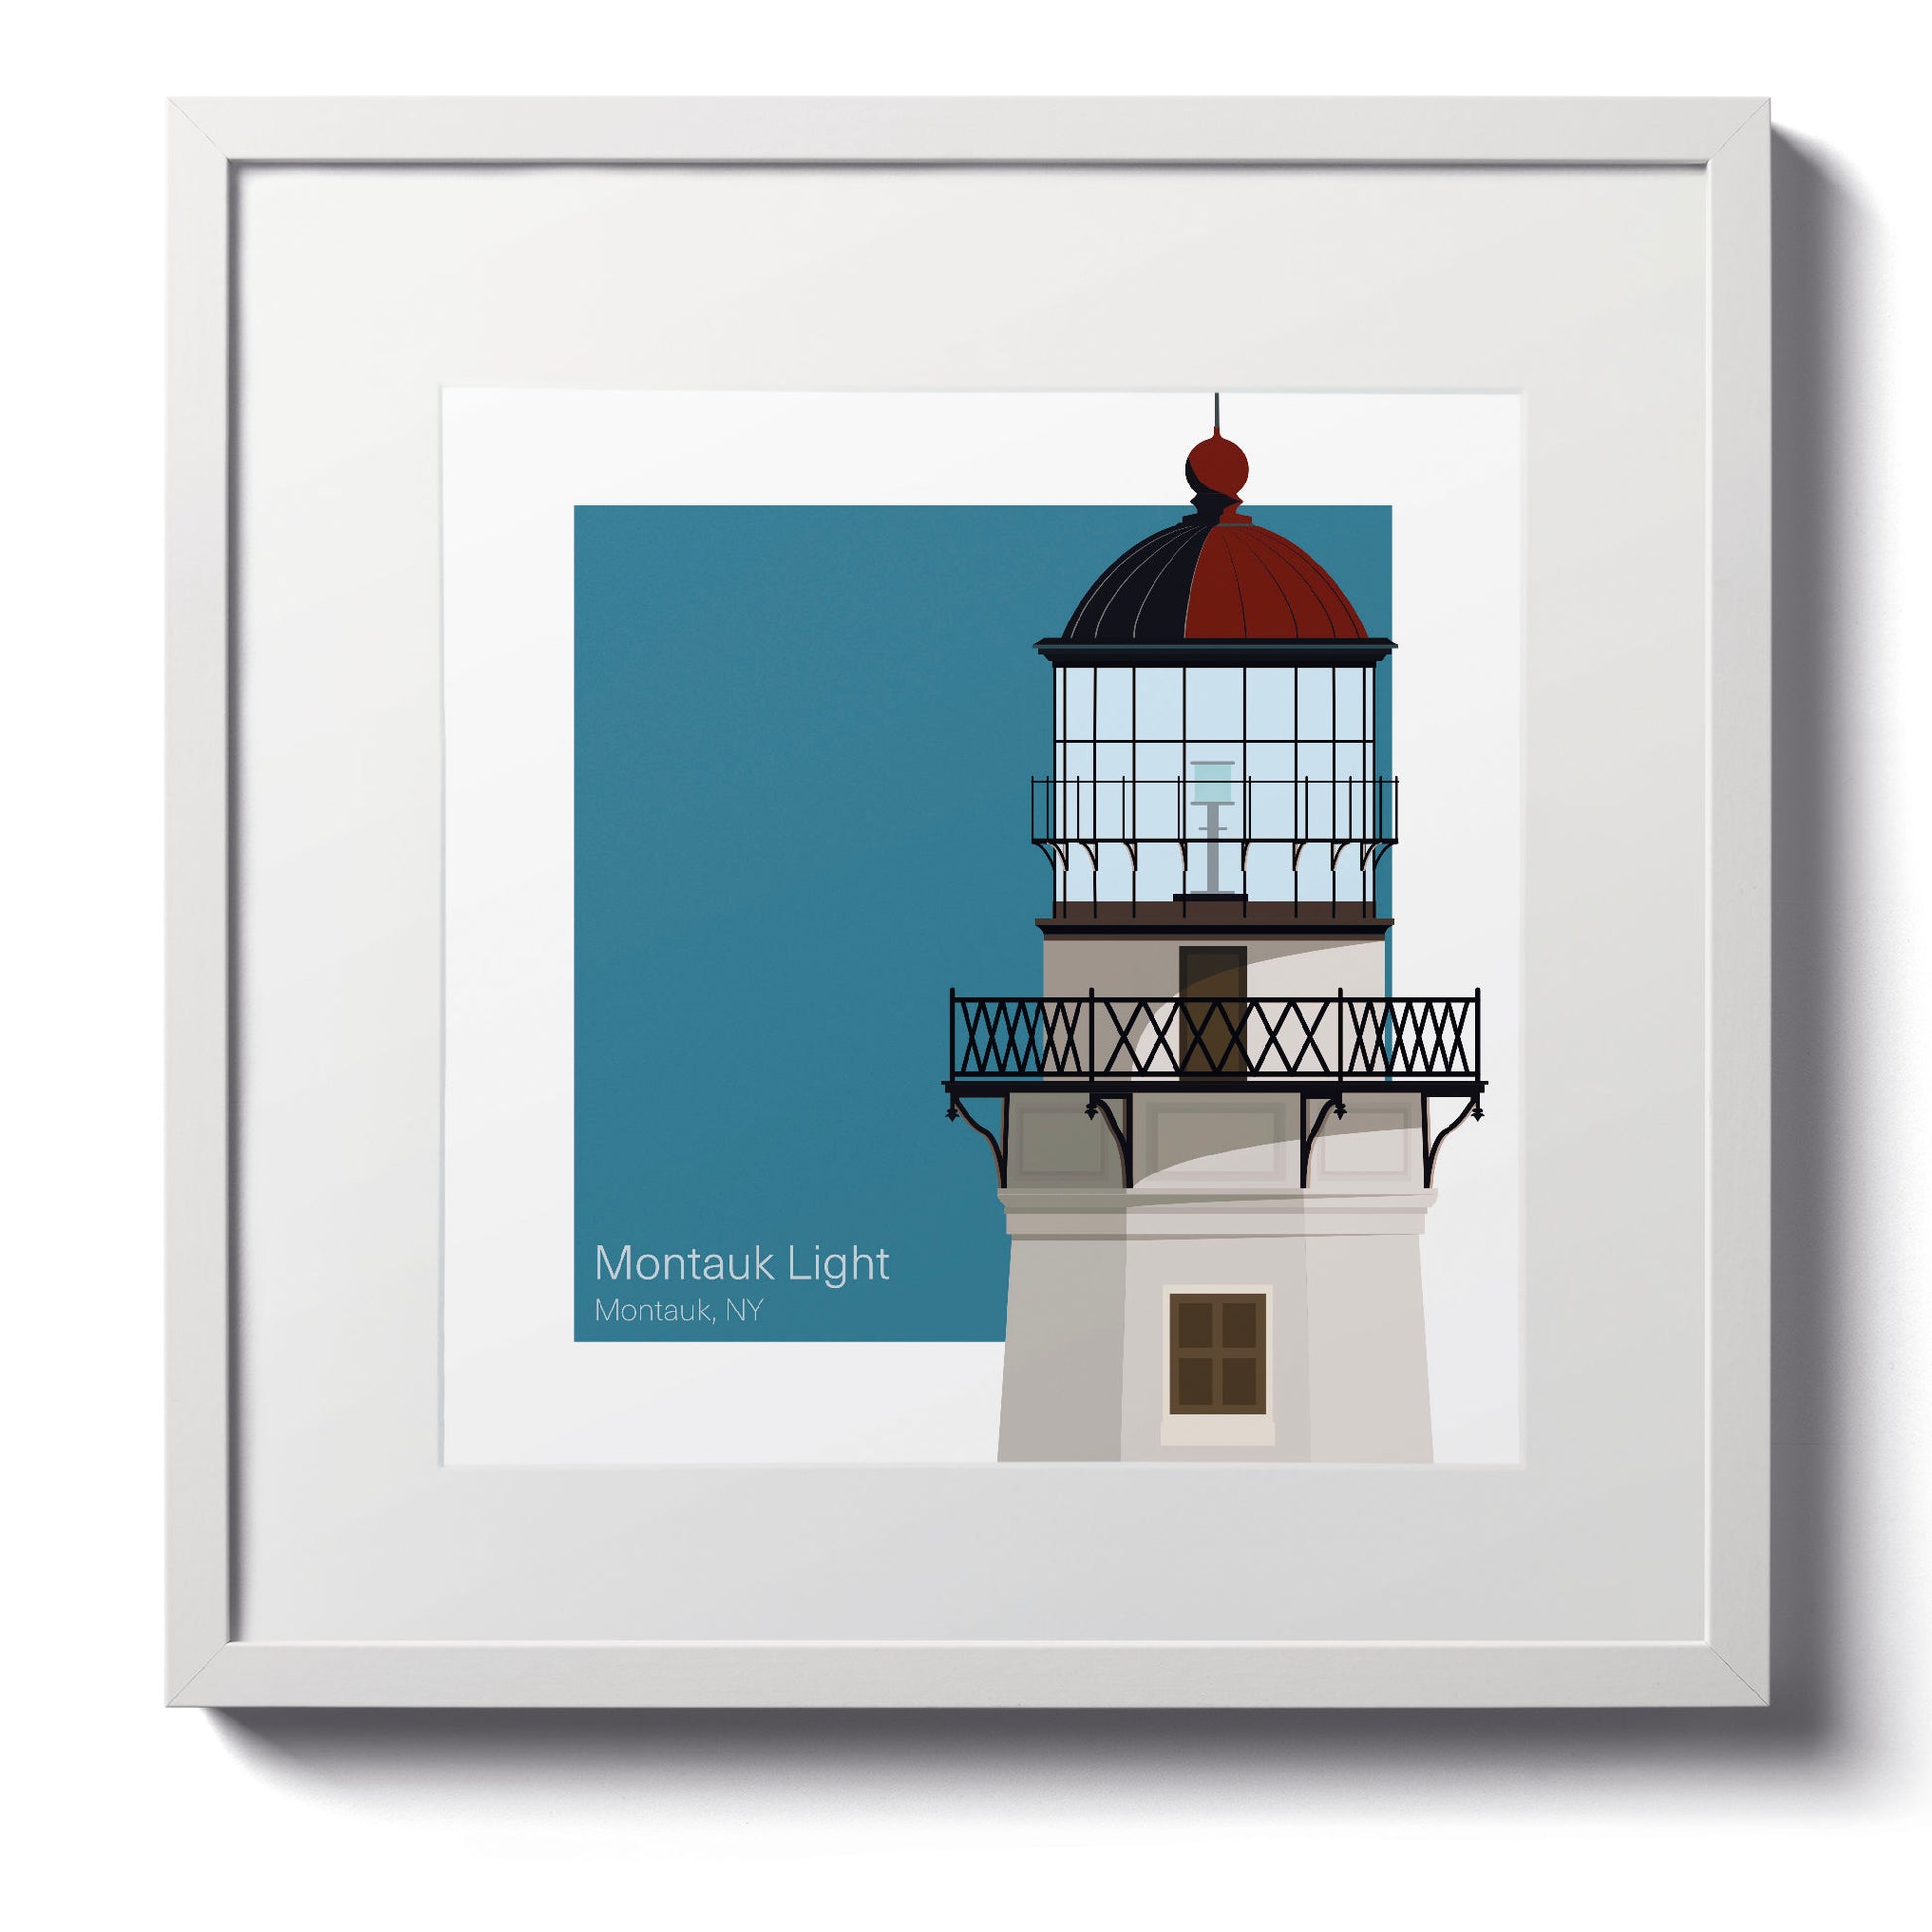 Illustration of the Montauk Point lighthouse, NY, USA. On a white background with aqua blue square as a backdrop., in a white frame  and measuring 12"x12" (30x30cm).